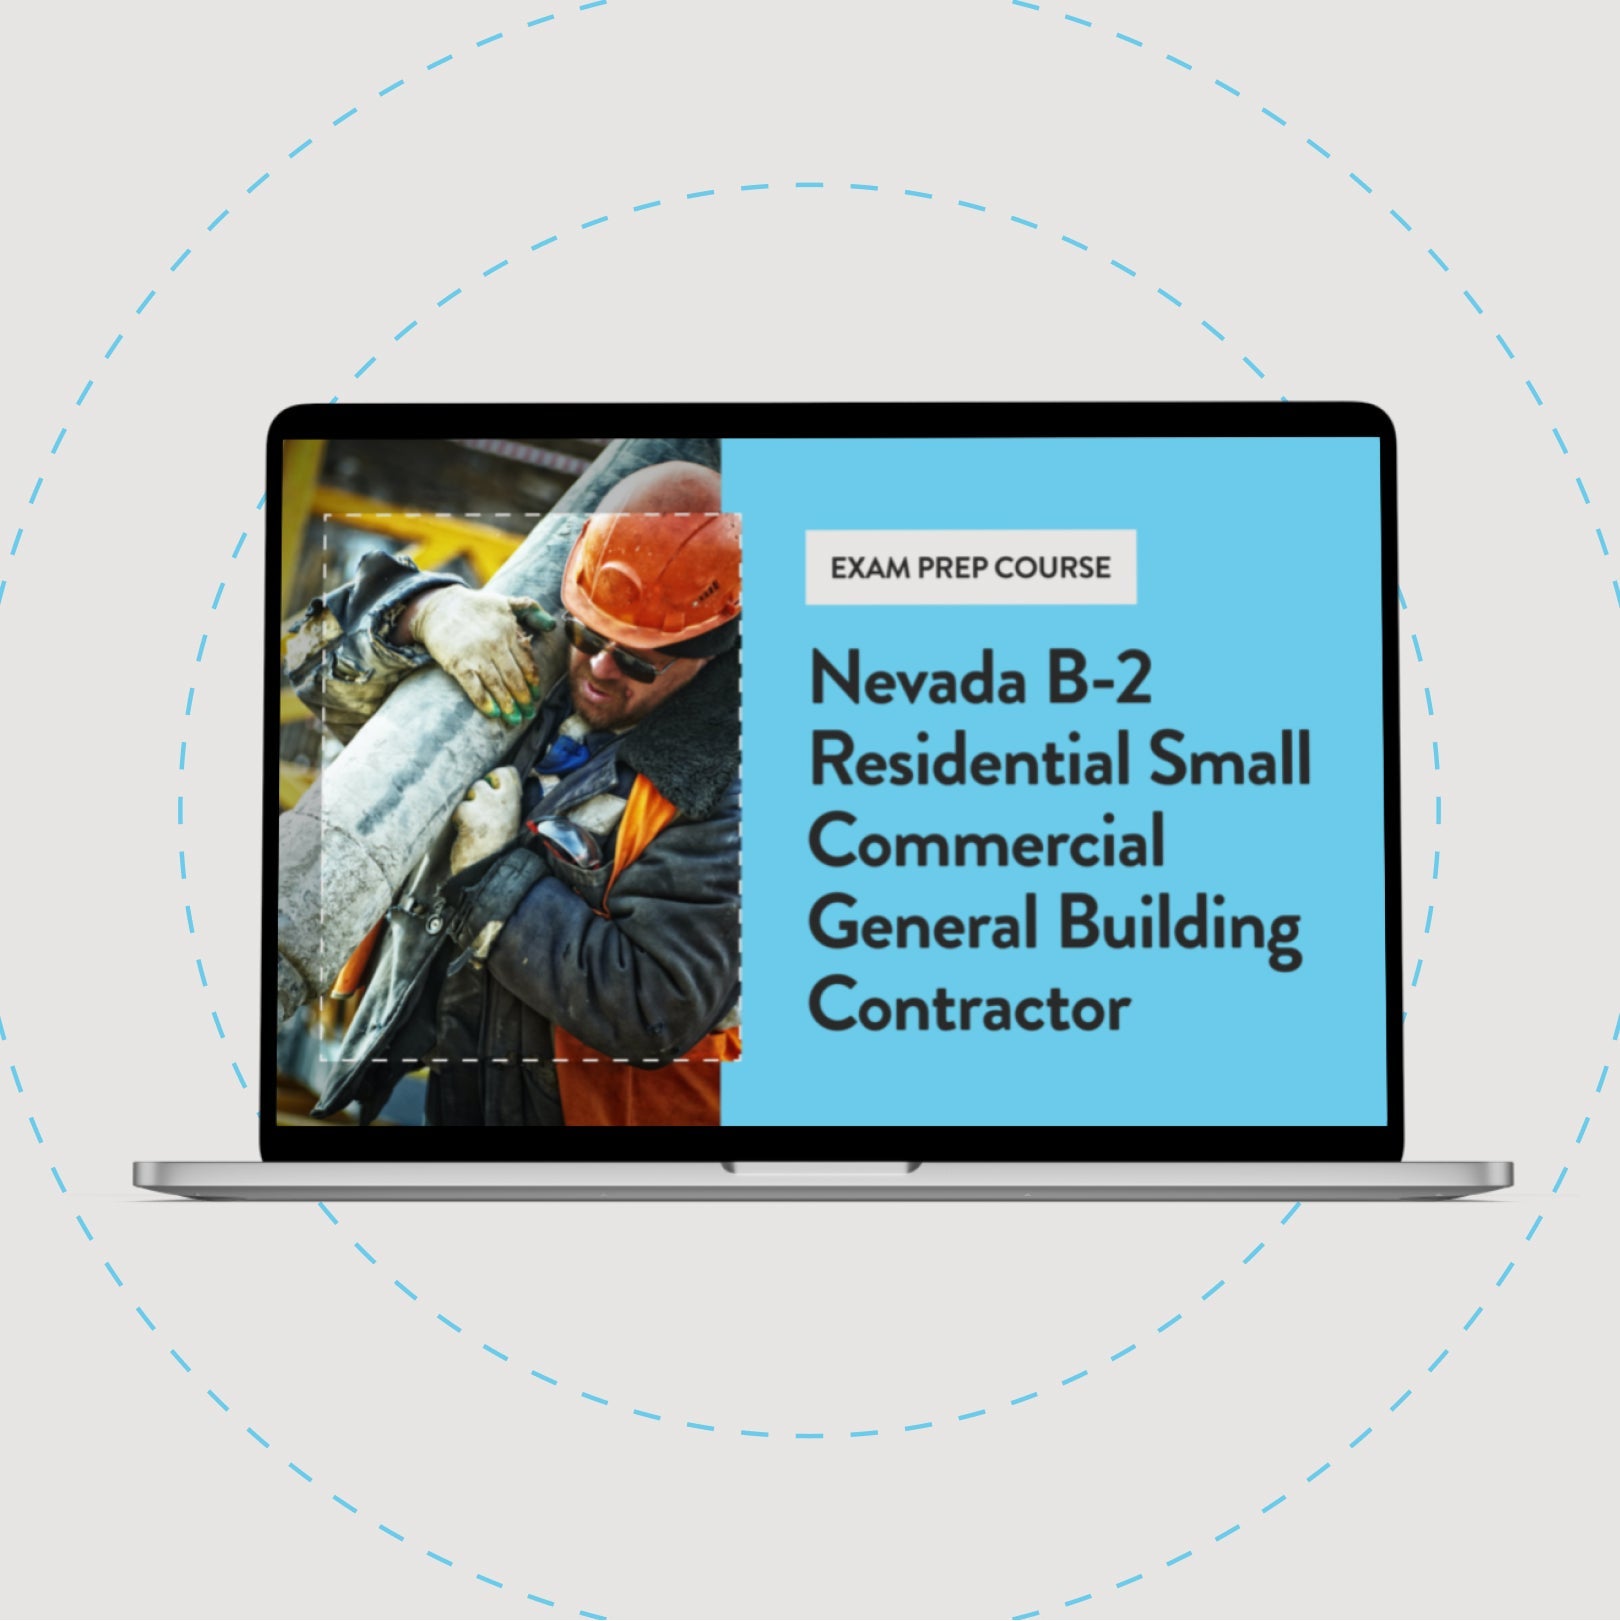 Nevada B-2 Residential Small Commercial General Building Contractor Exam Prep Course